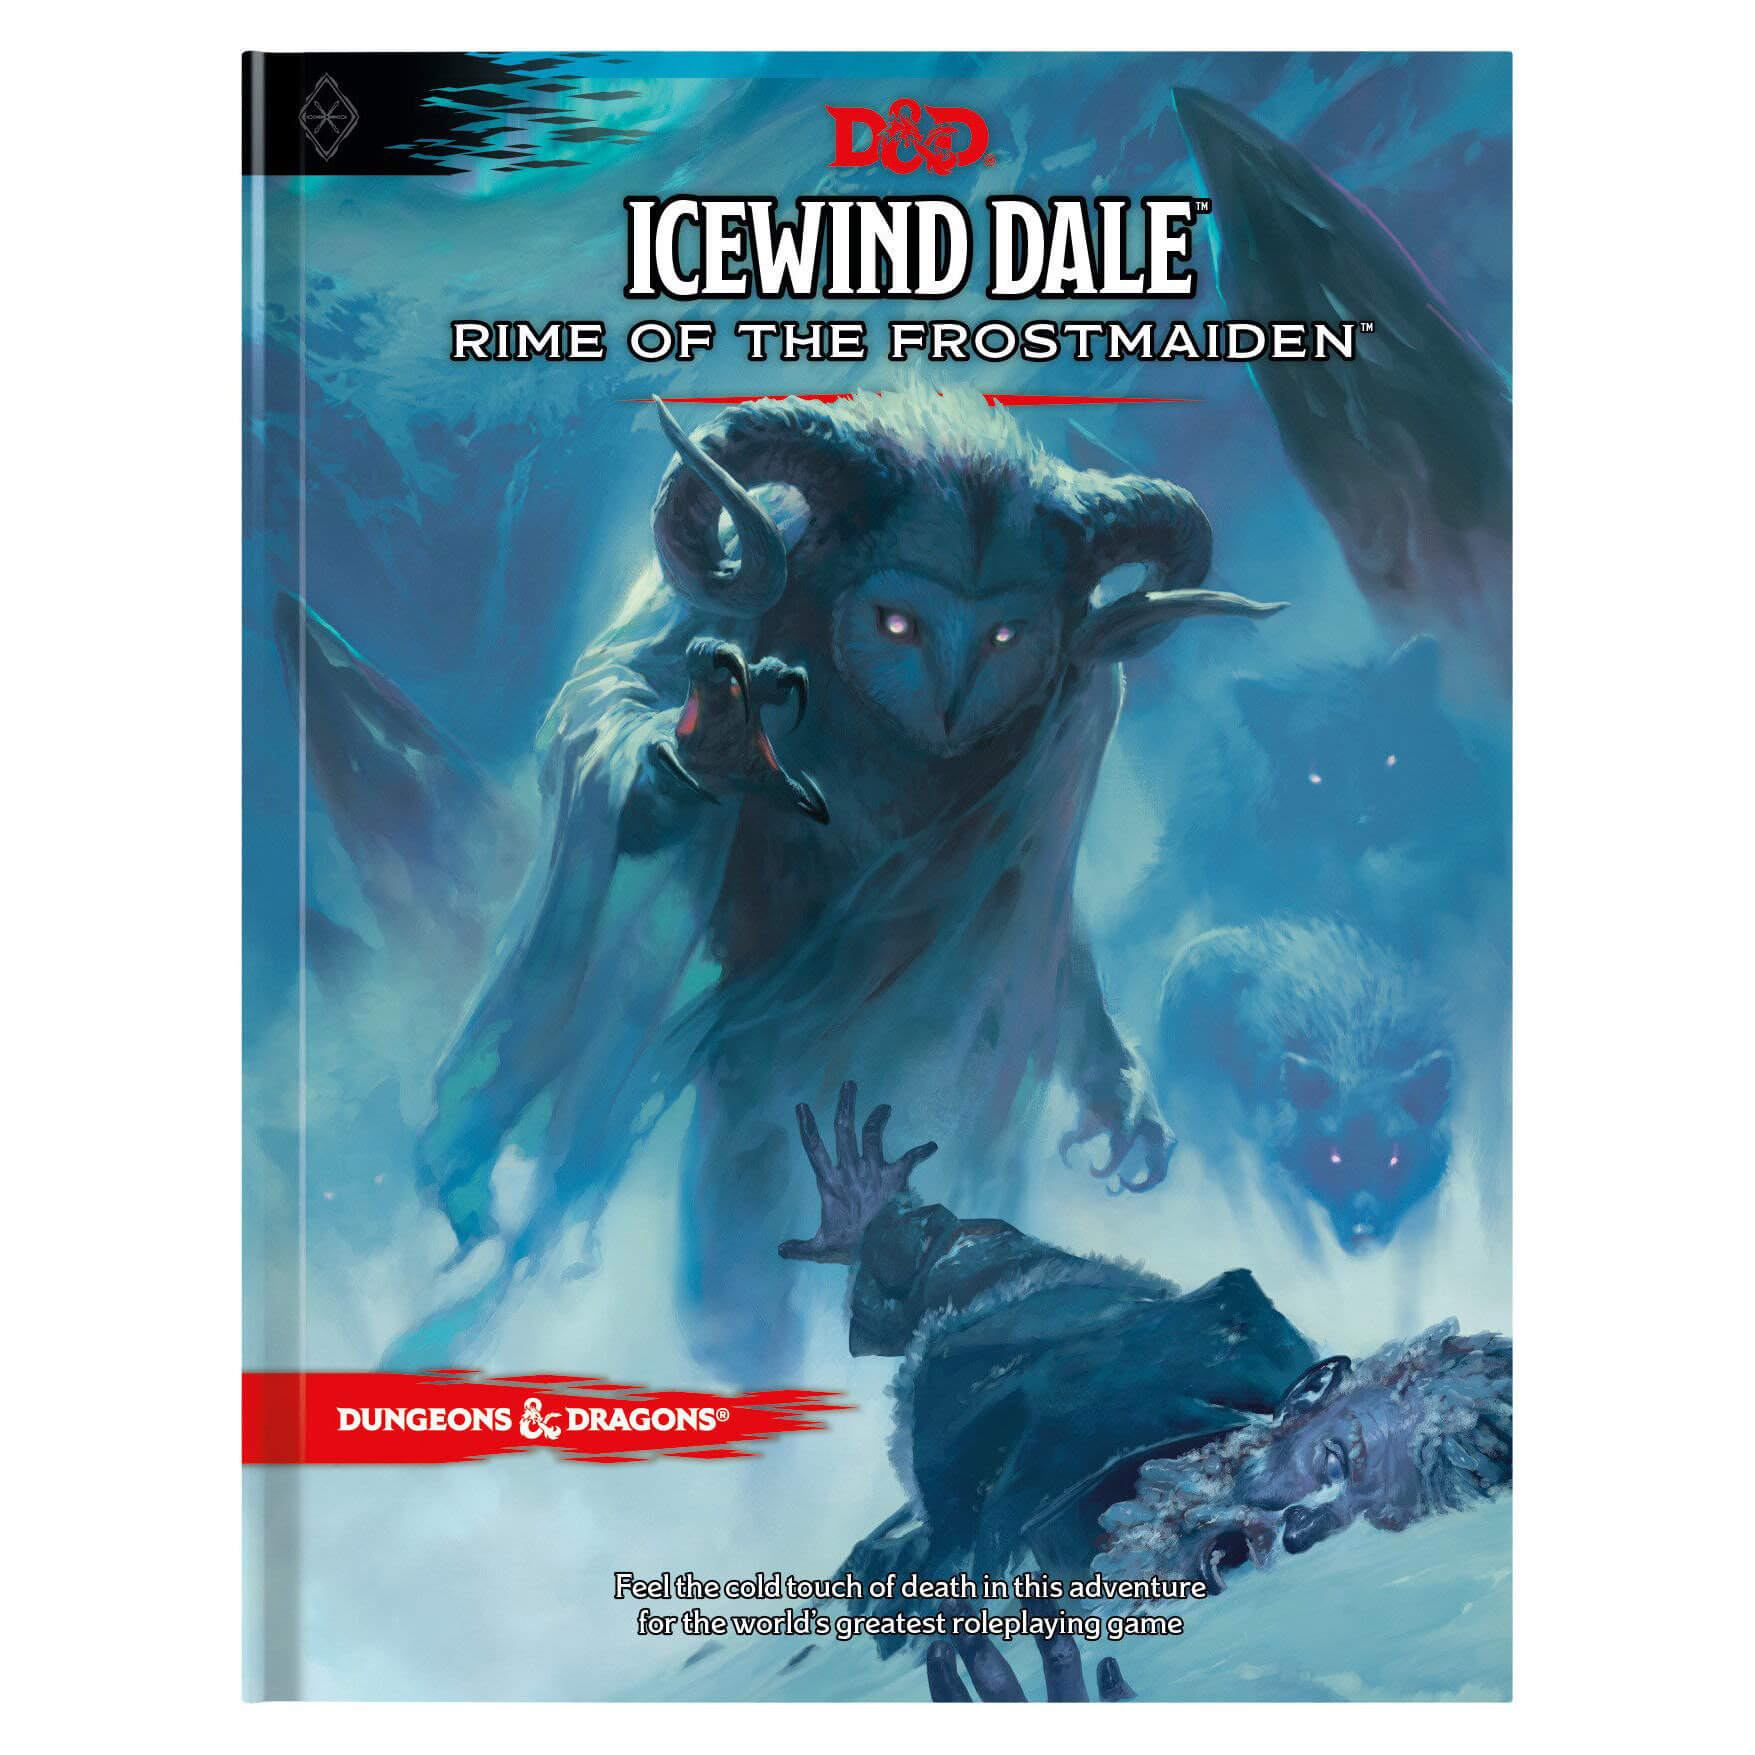 D&D Icewind Dale Rime of the Frostmaiden Hardcover